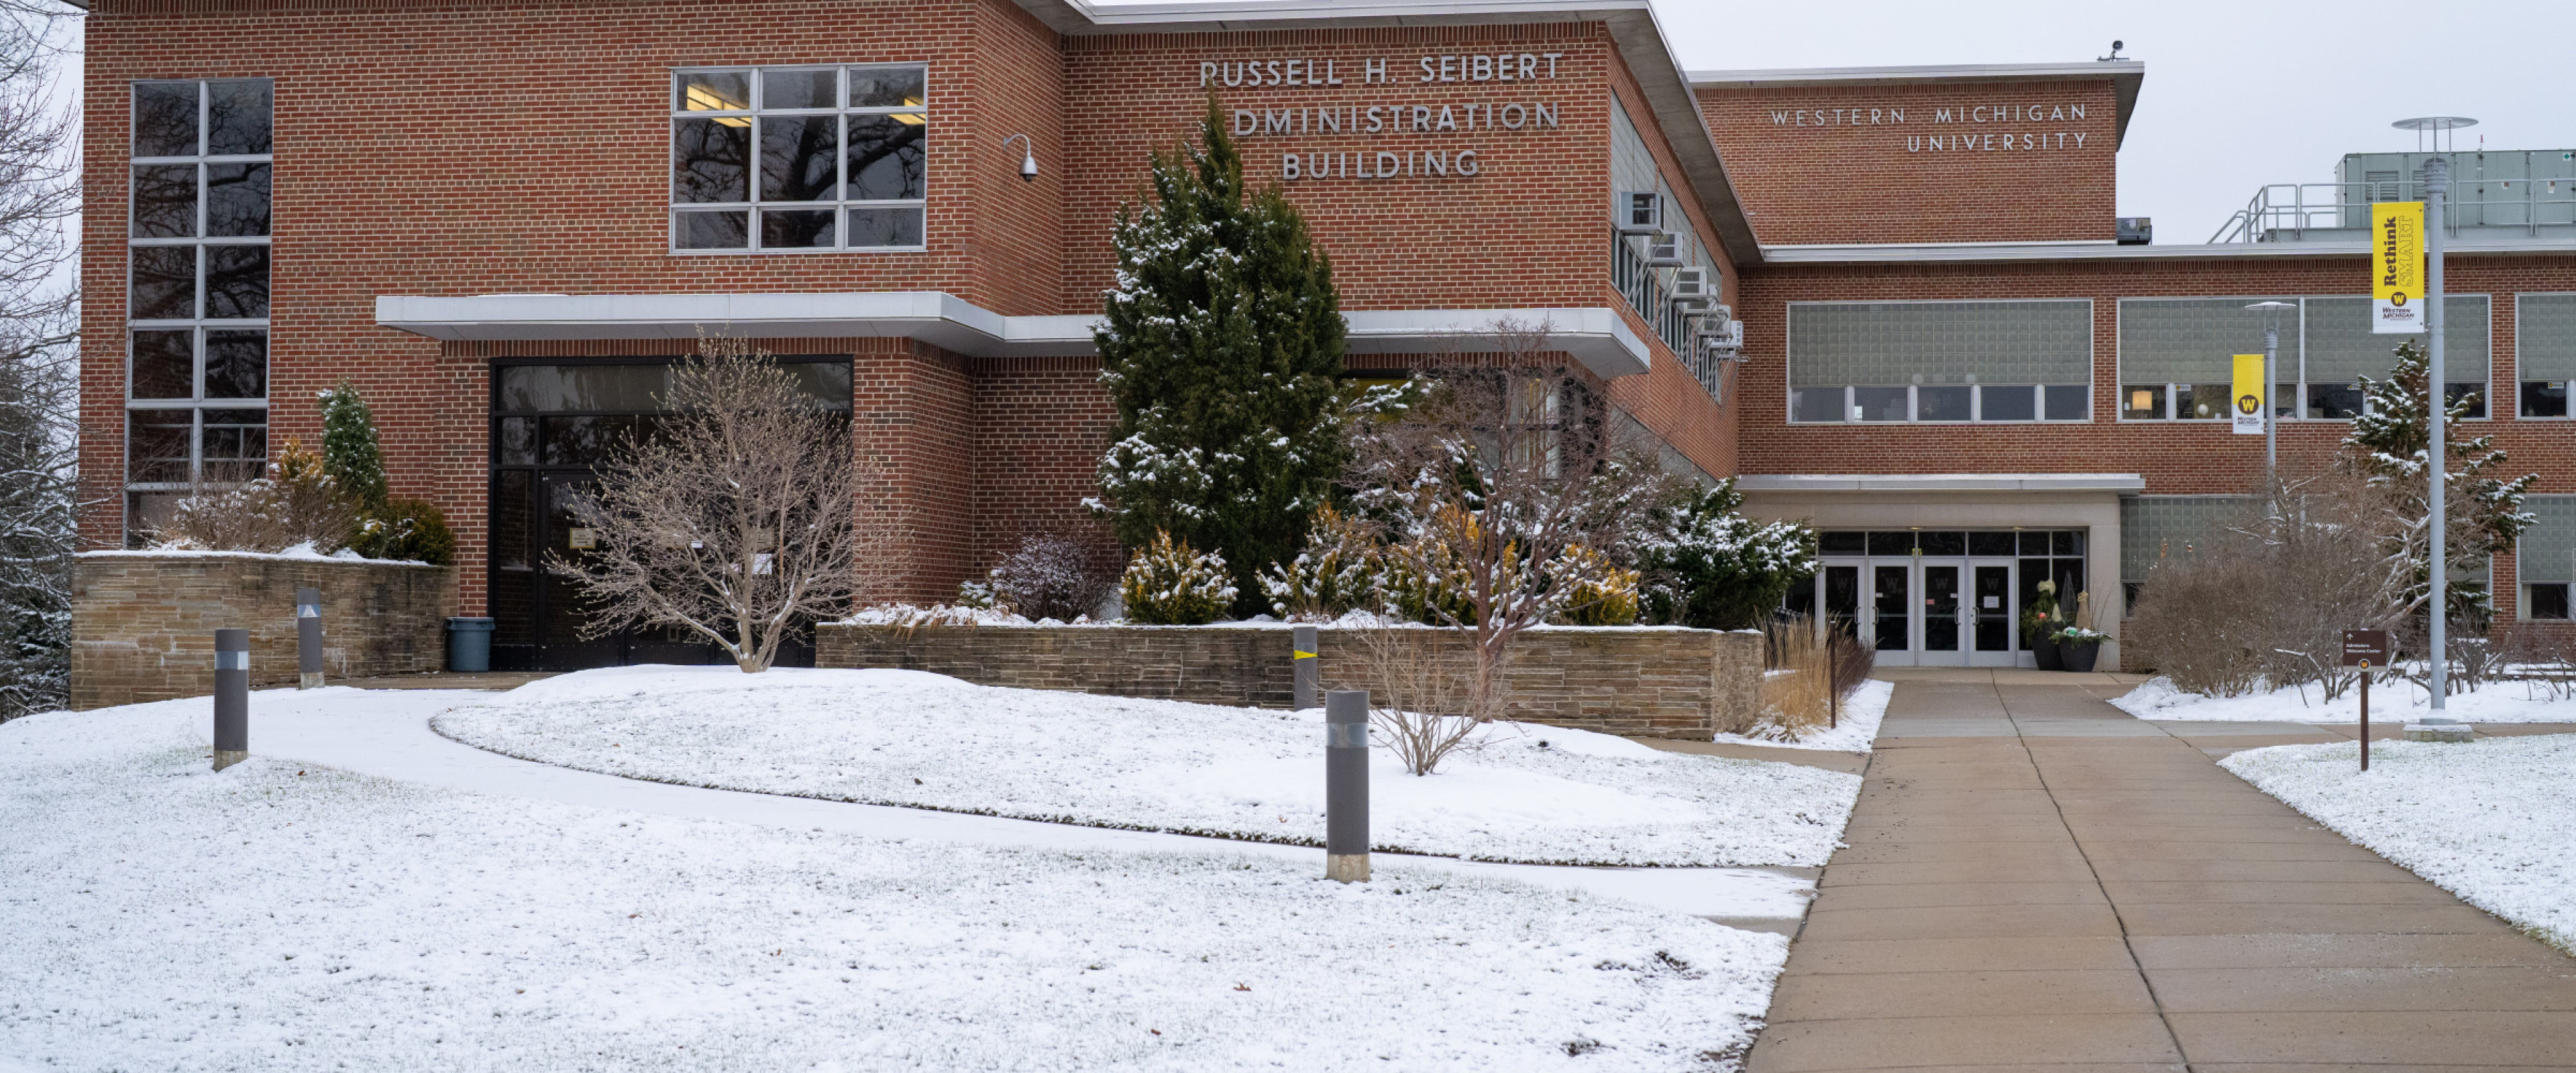 The Seibert Administration Building is seen during a snowy day. Built in 1952, the Russell M. Seibert Administration Building is used for Human Resources and other administrative offices.